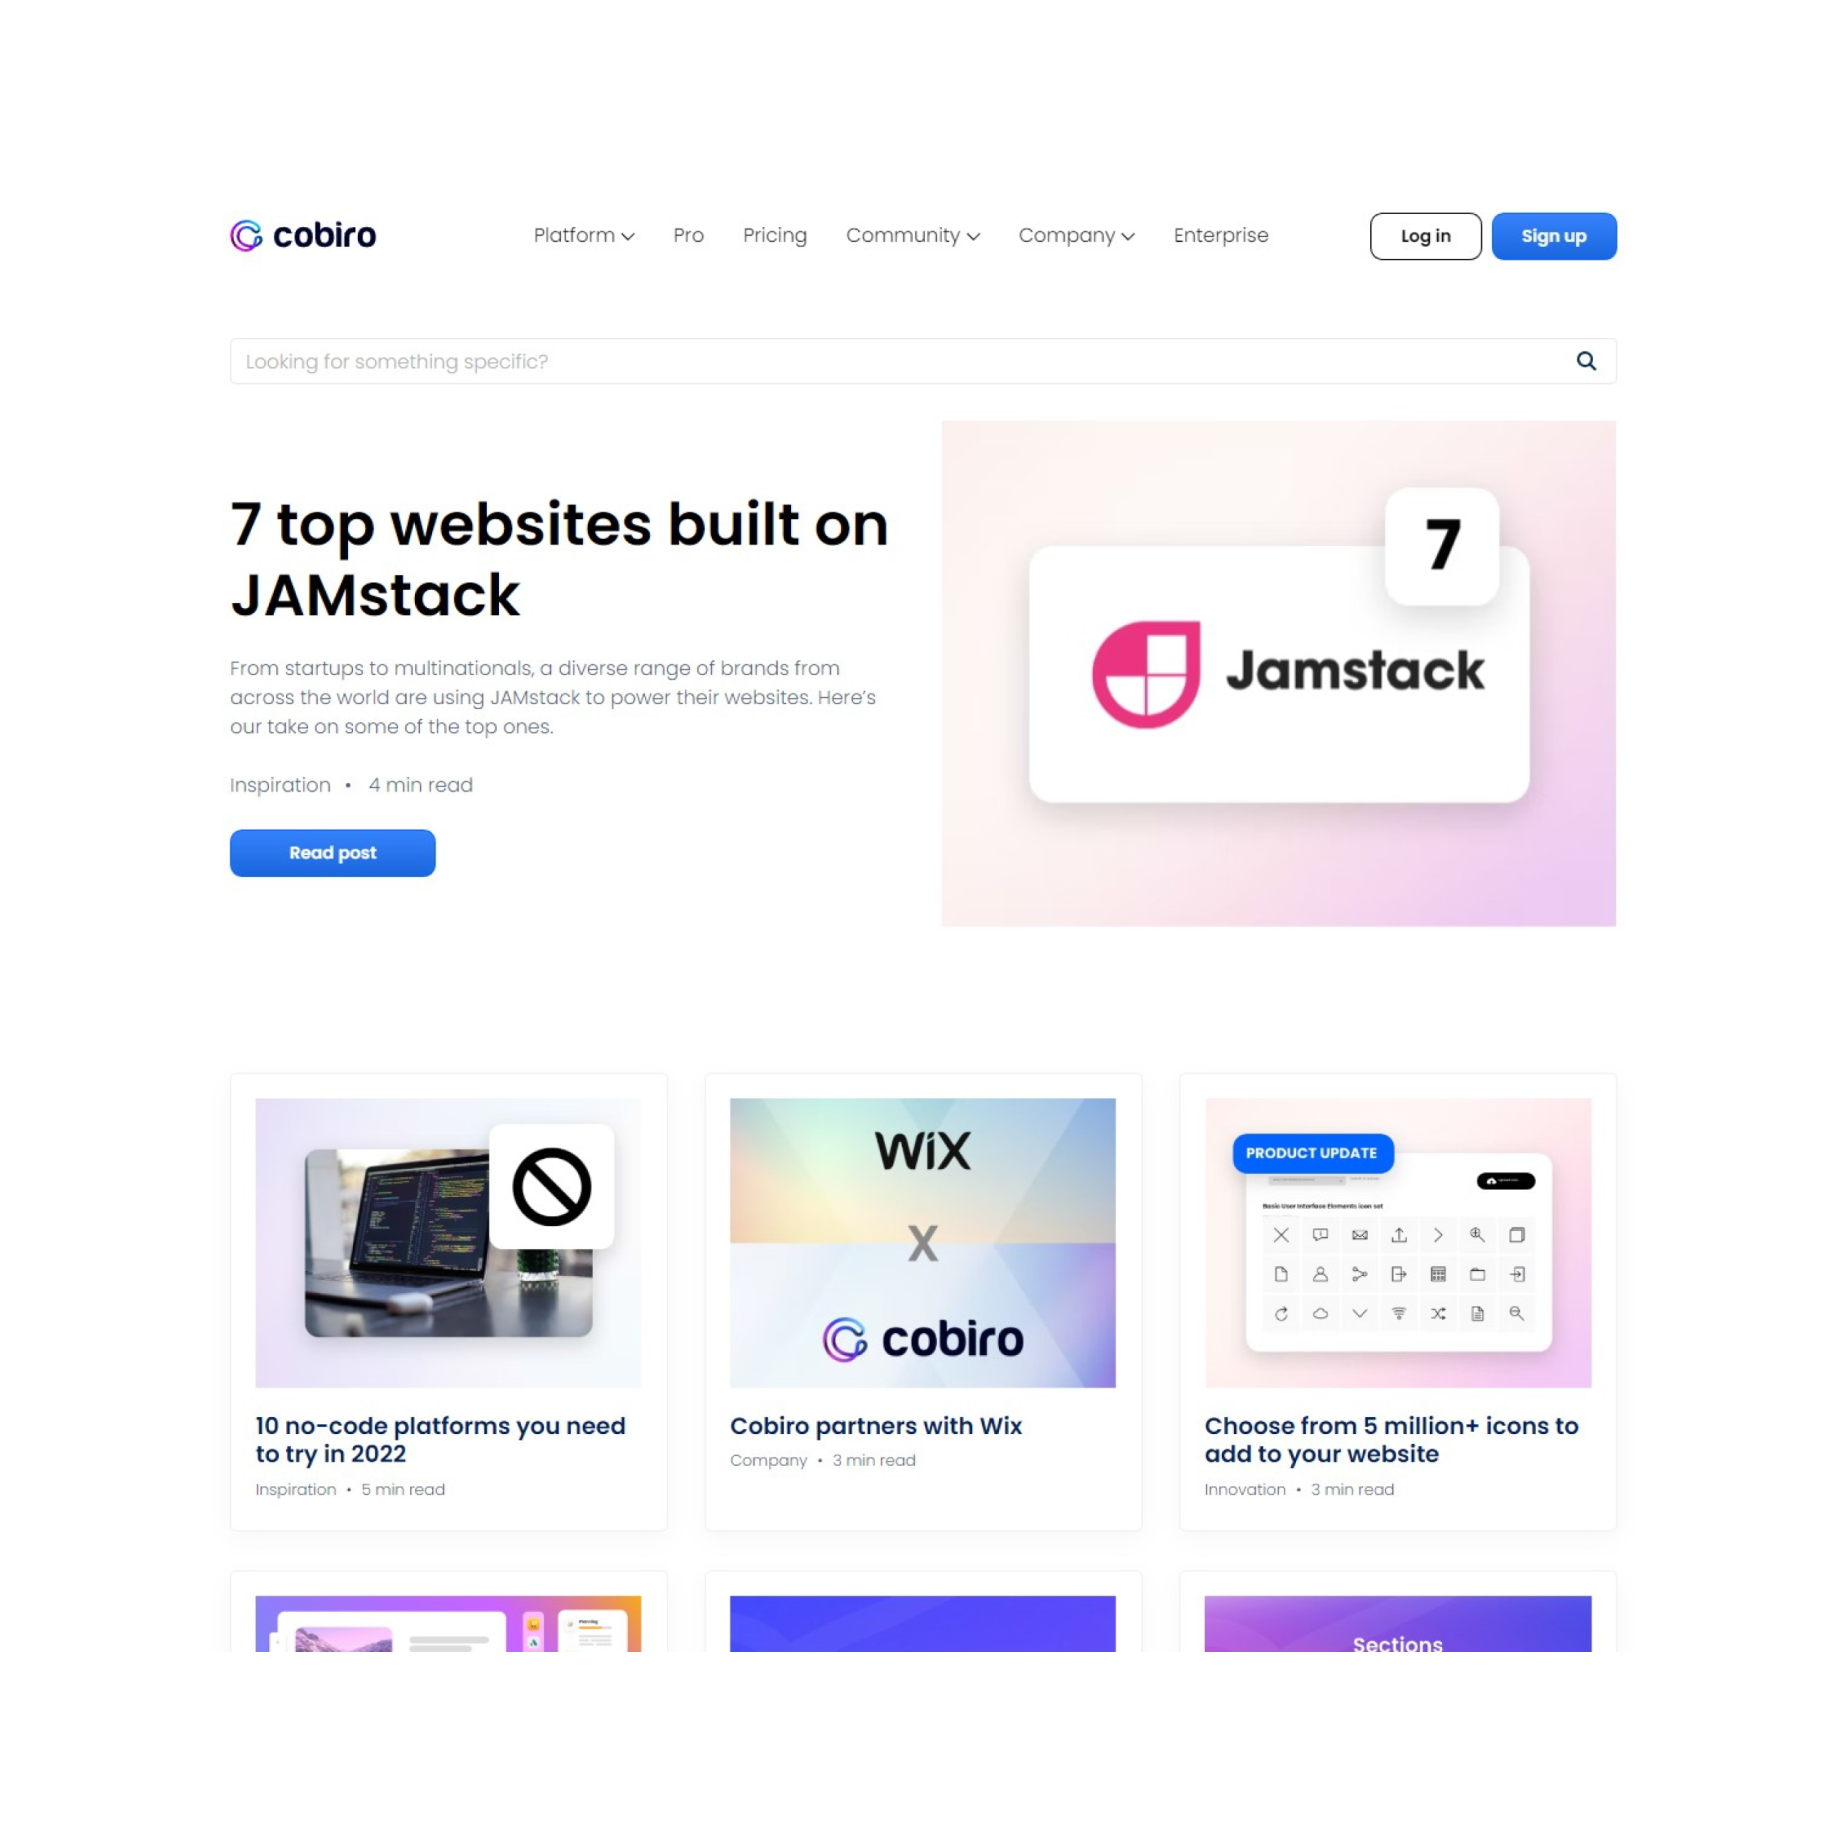 Content from Cobiro's website highlighting a blog post titled '7 top websites built on JAMstack' and other featured articles on tech platforms and partnerships.